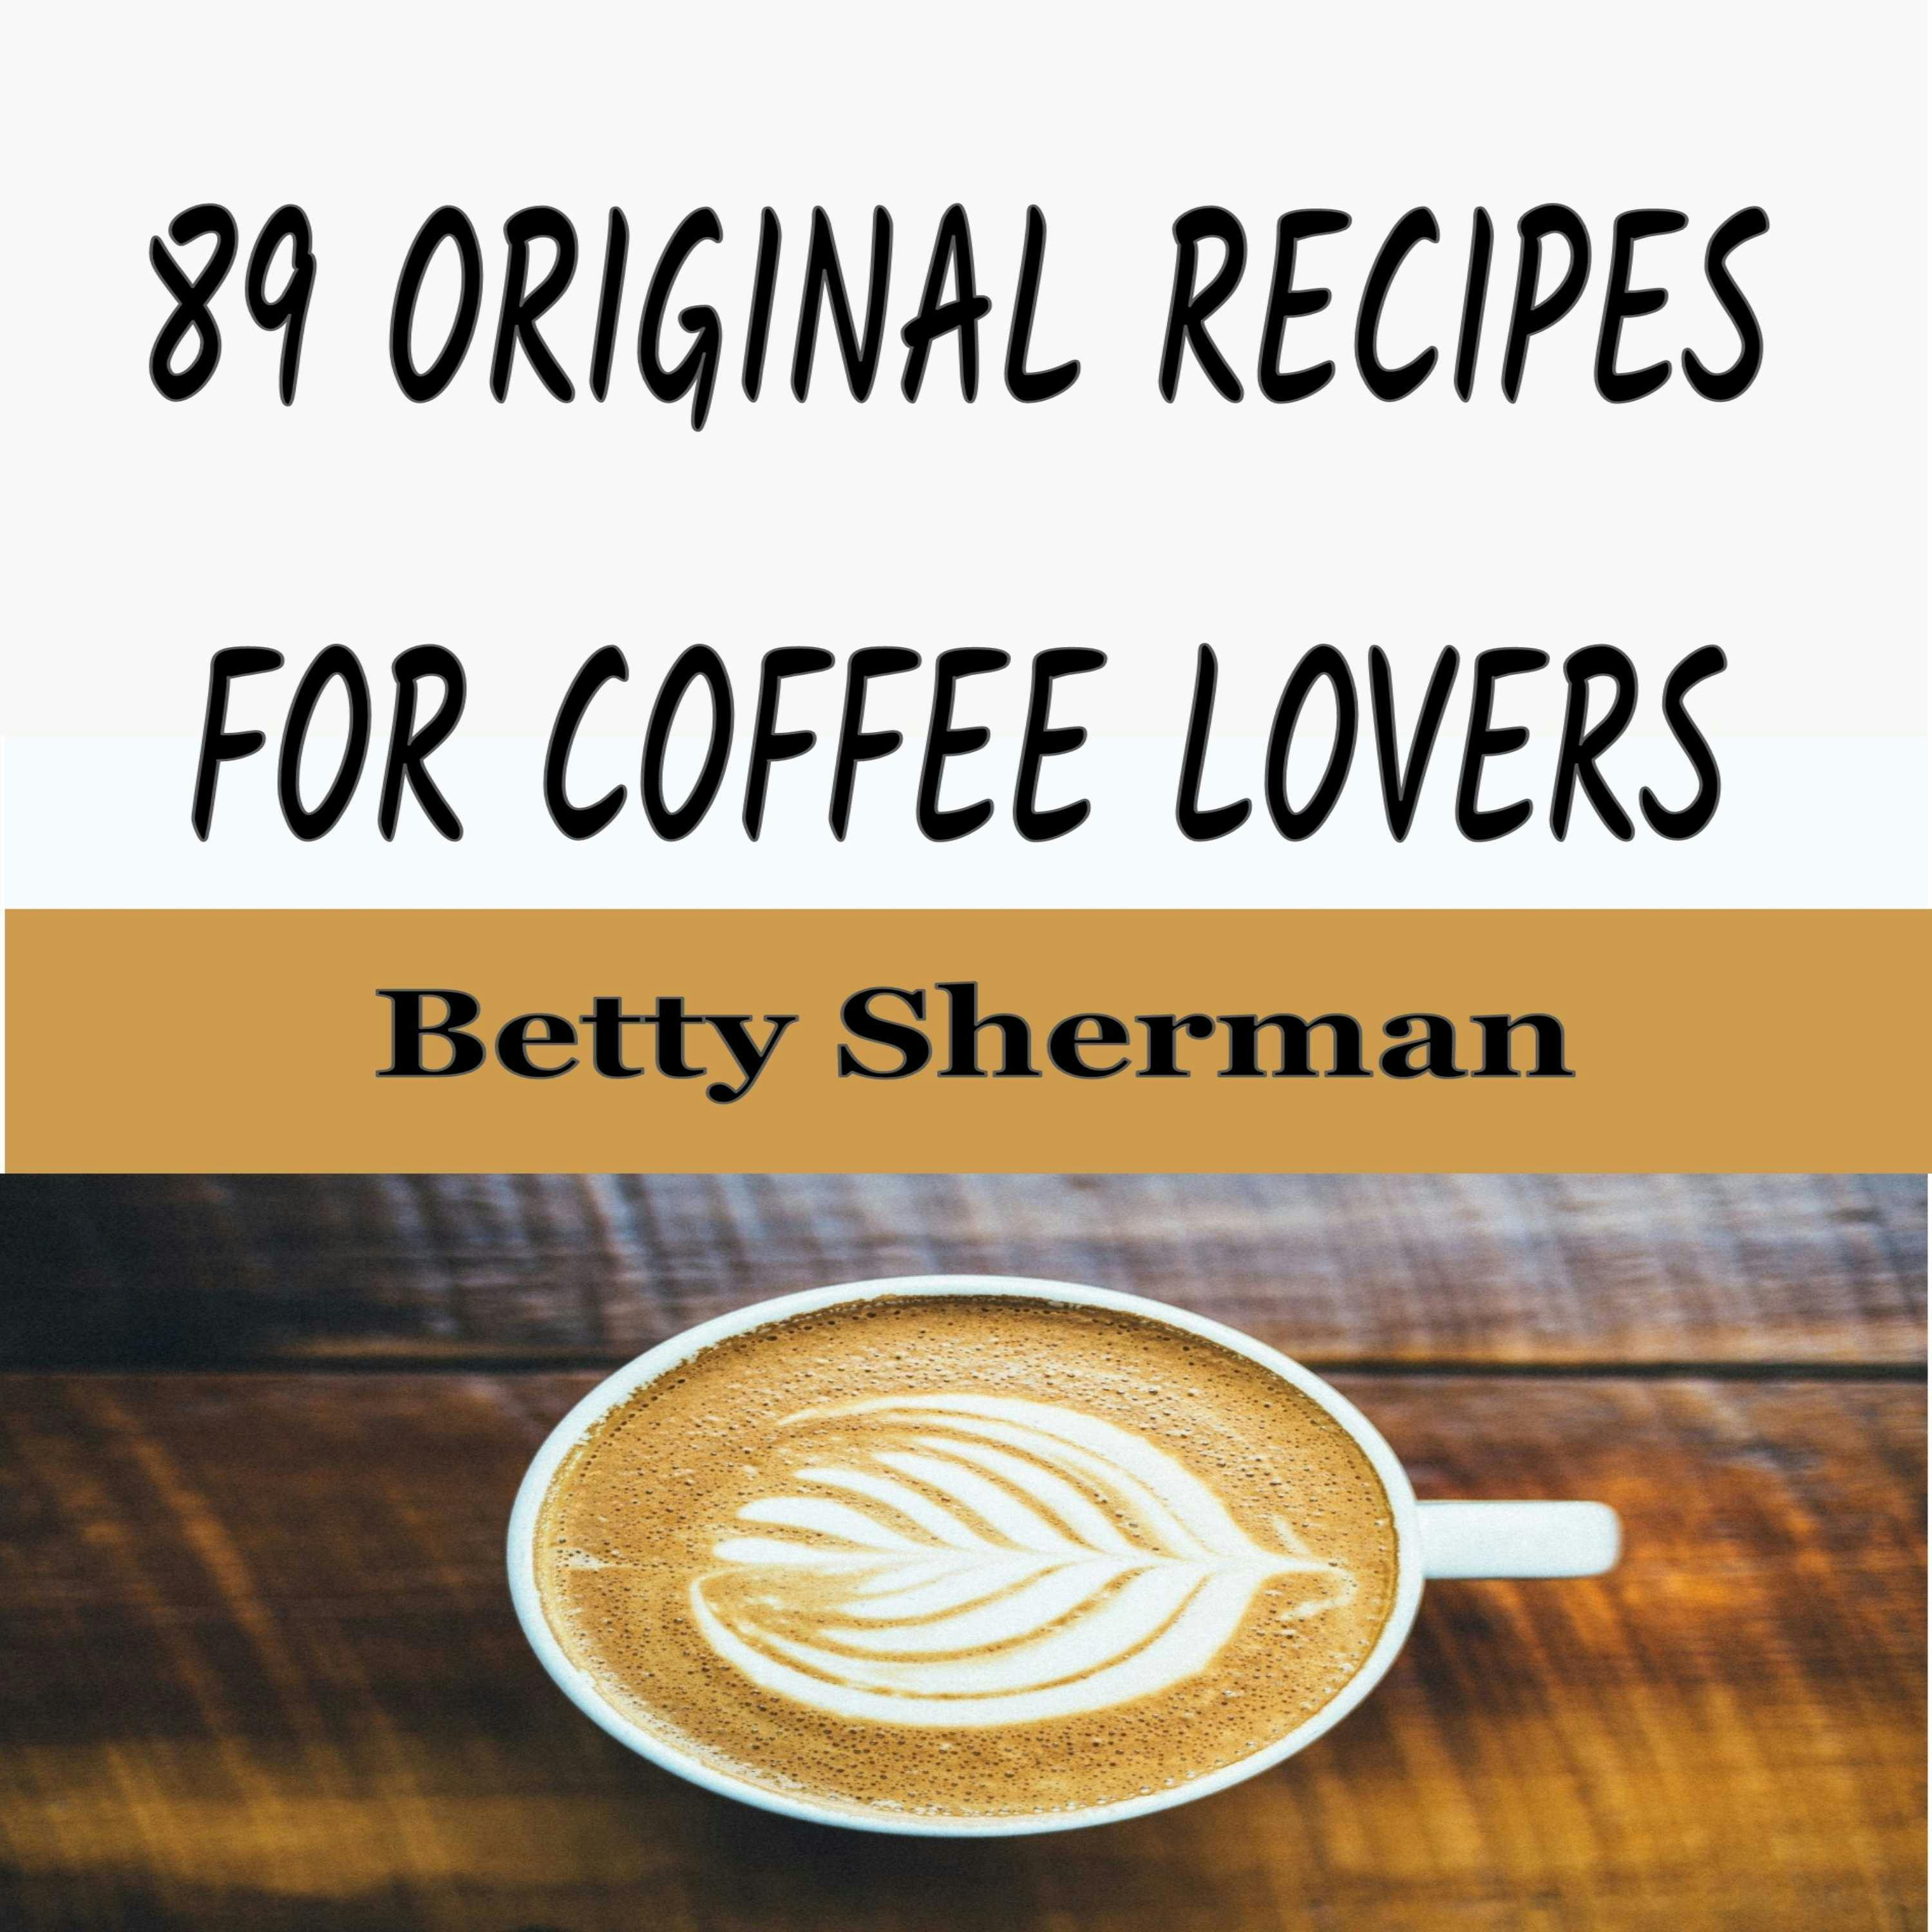 89 Original Recipes for Coffee Lovers - undefined